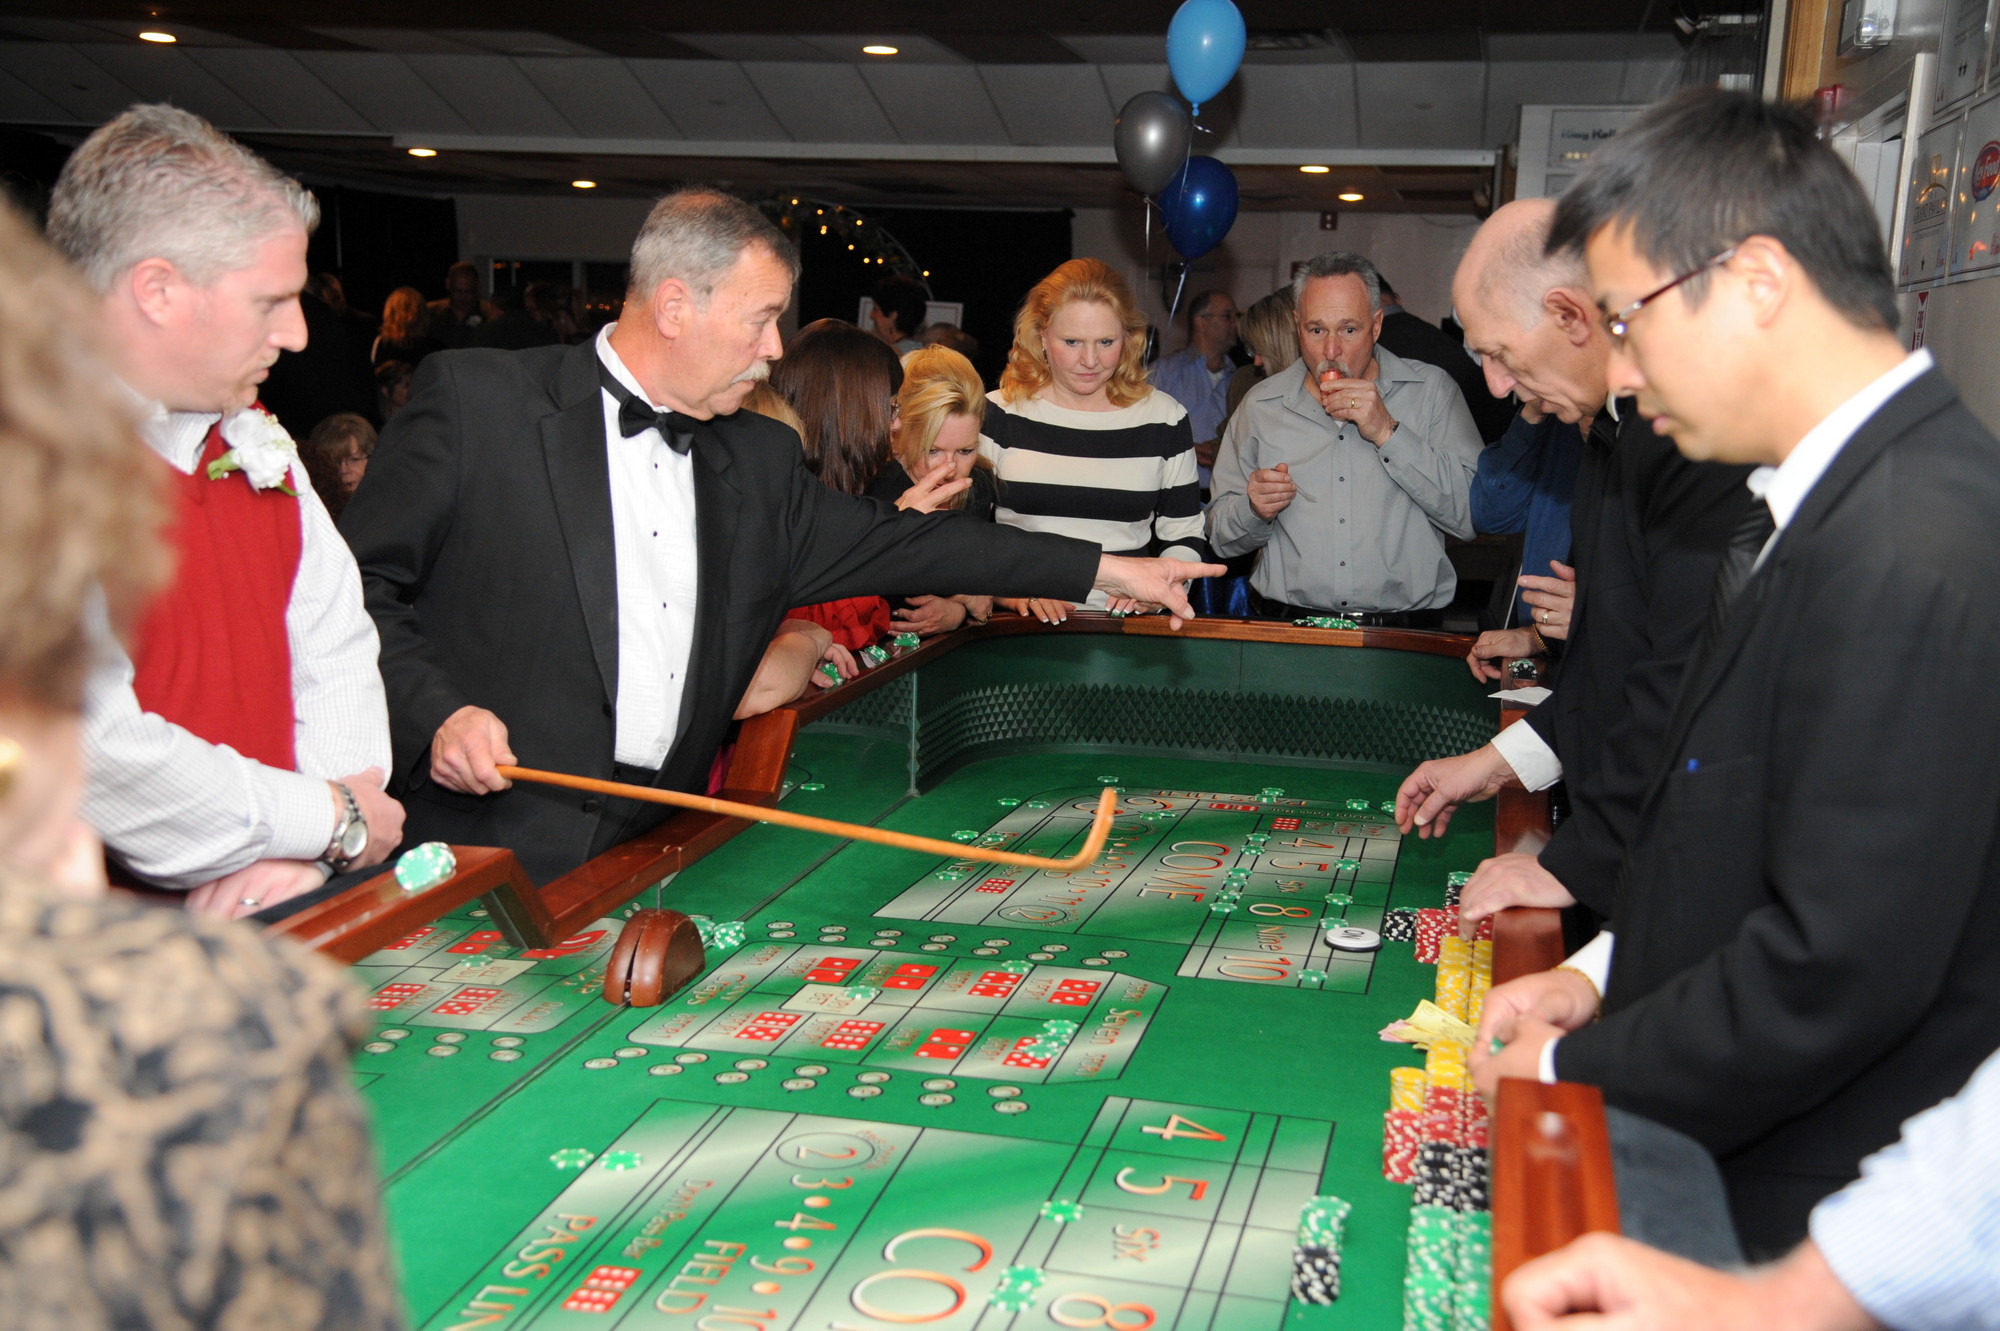 Guests were able to play casino-style games at the Sandel Center.